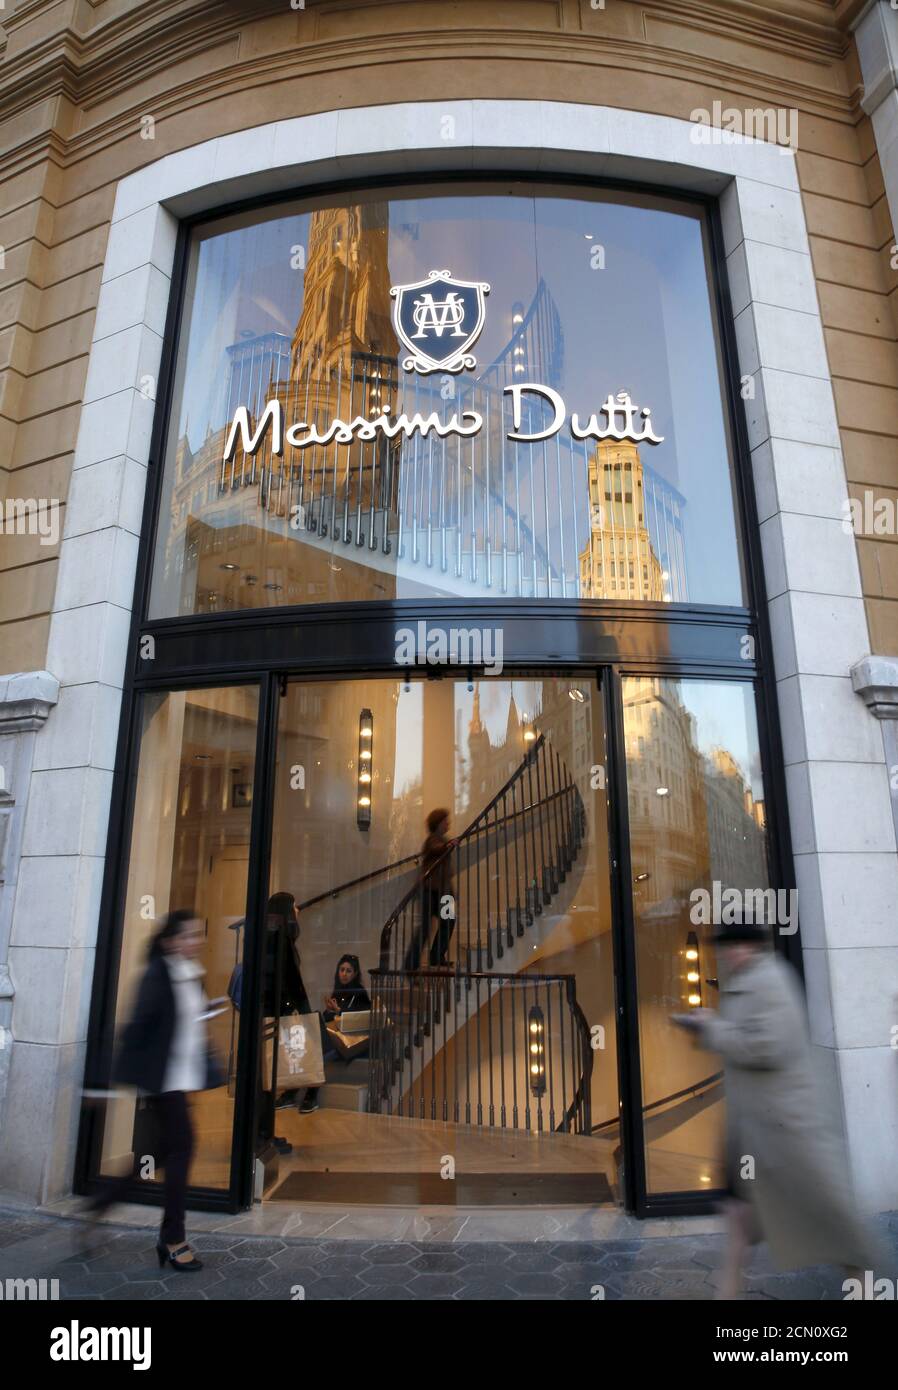 People walk past a Massimo Dutti store, an Inditex brand, in central  Barcelona, Spain, March 8, 2016. REUTERS/Albert Gea Stock Photo - Alamy